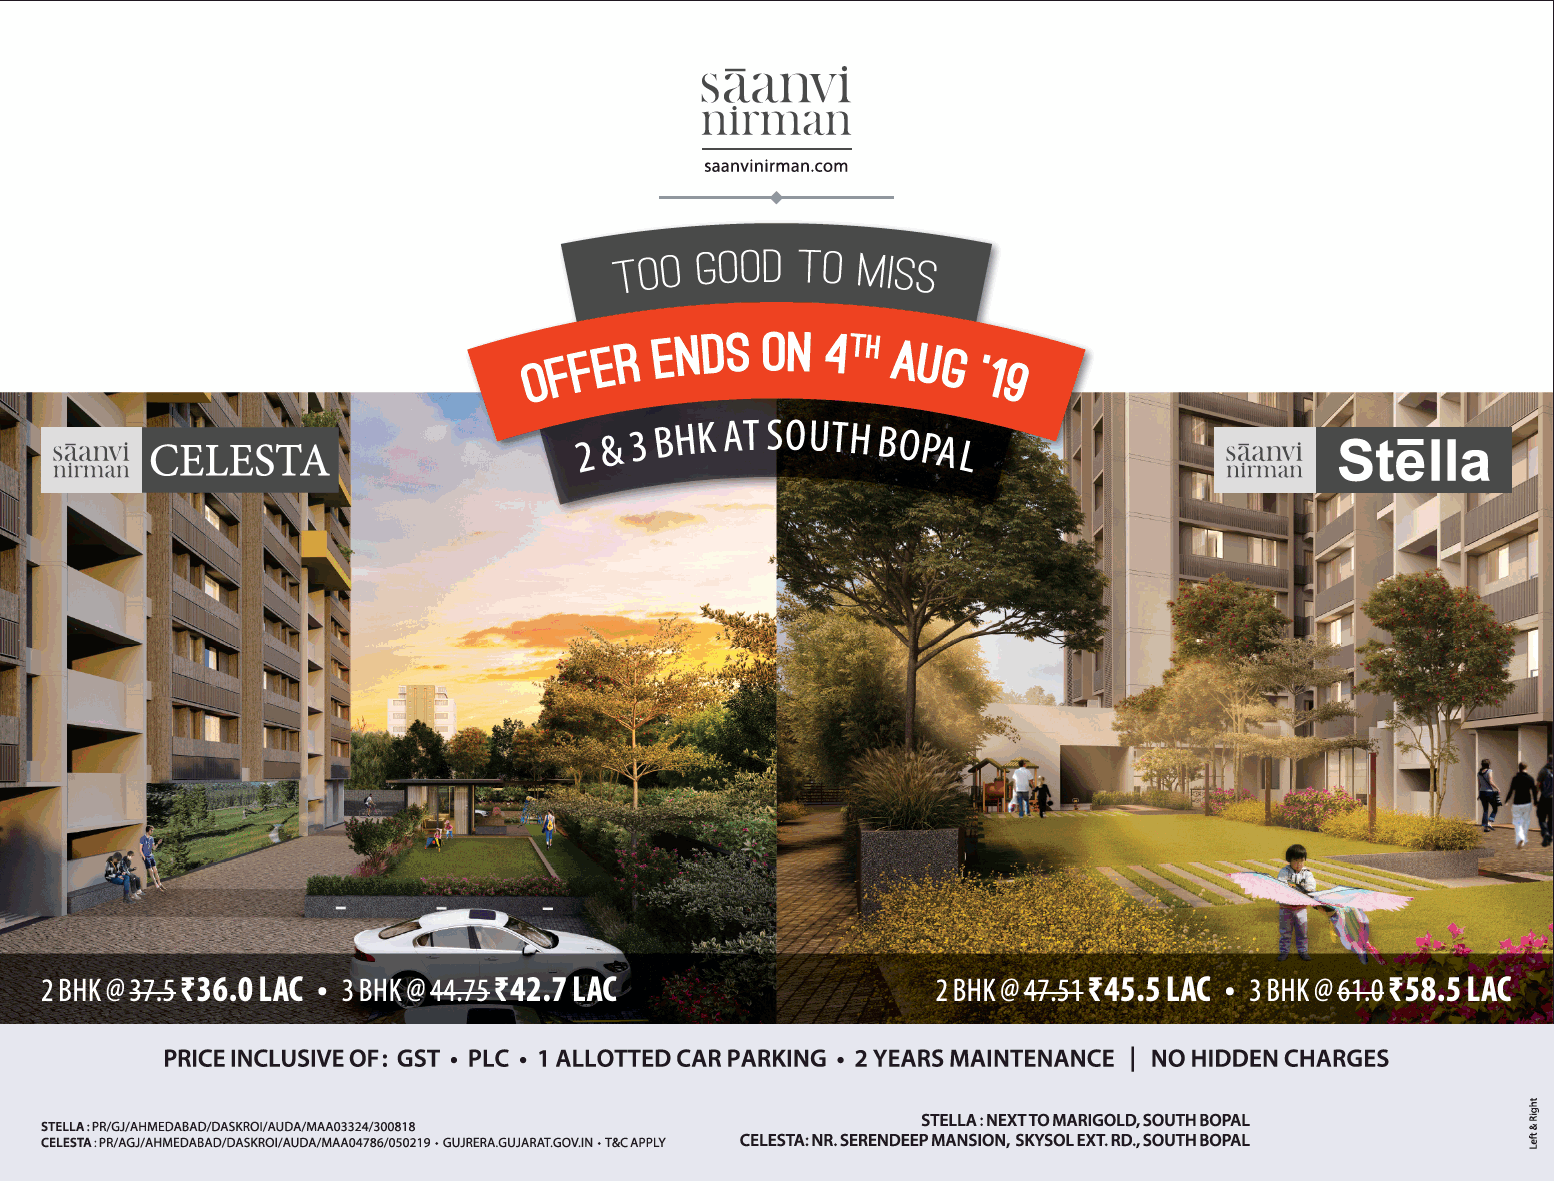 Saanvi Nirman offer ends on 4th Aug 19, 2 & 3 BHK at South Bhopal, Ahmedabad